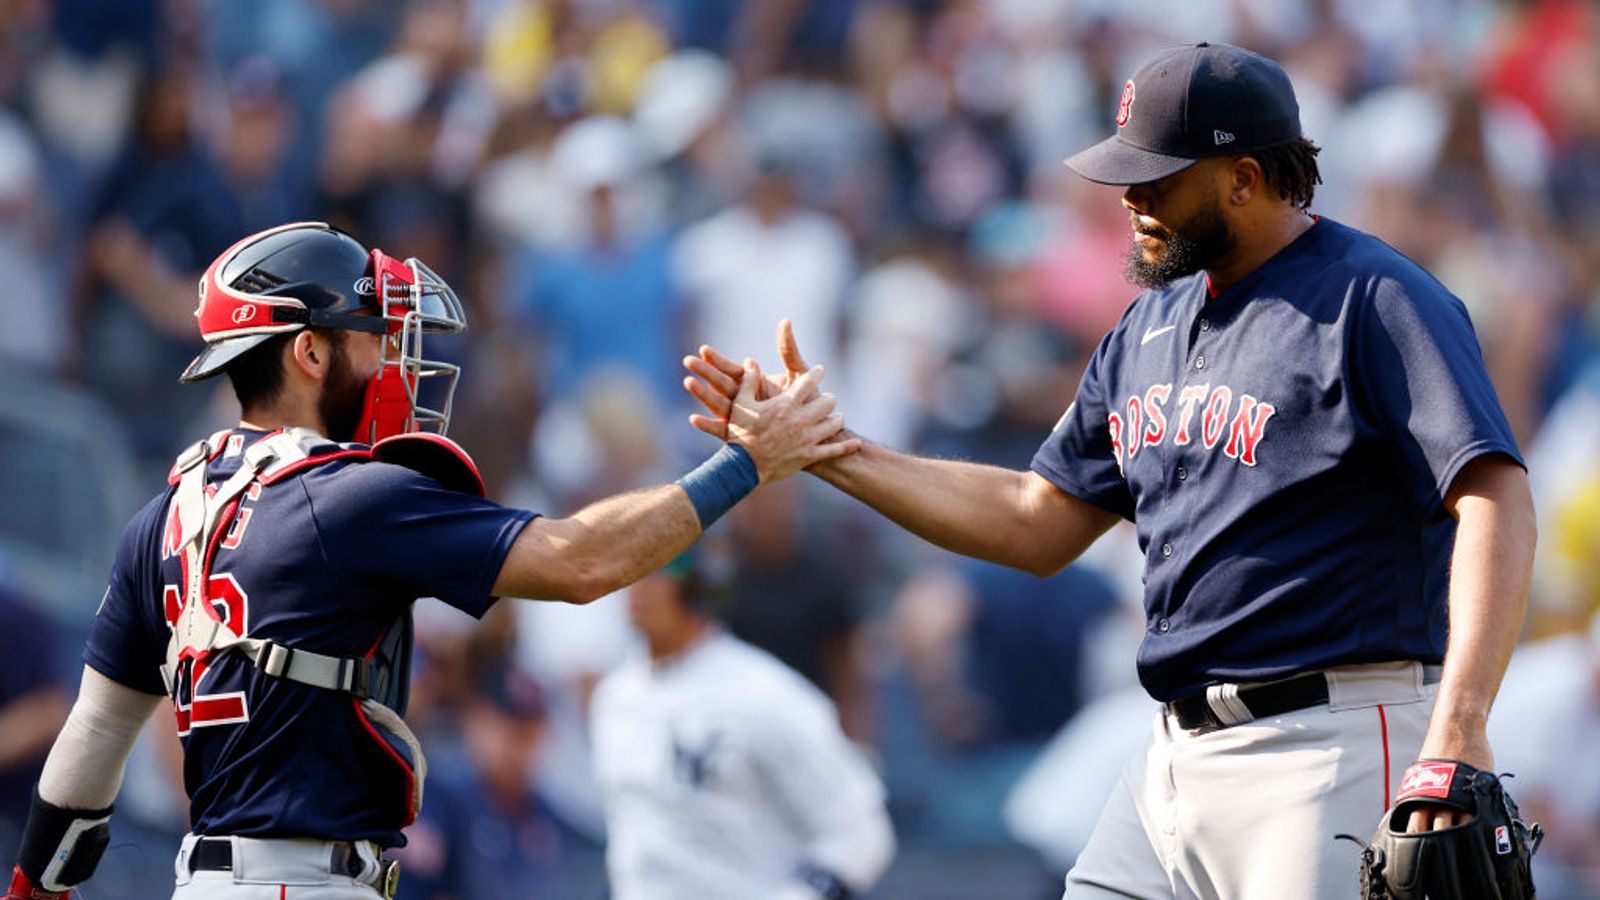 BSJ Game Report: Red Sox 6, Yankees 5 - Boston hangs on to sweep New York;  Turner and Devers power win